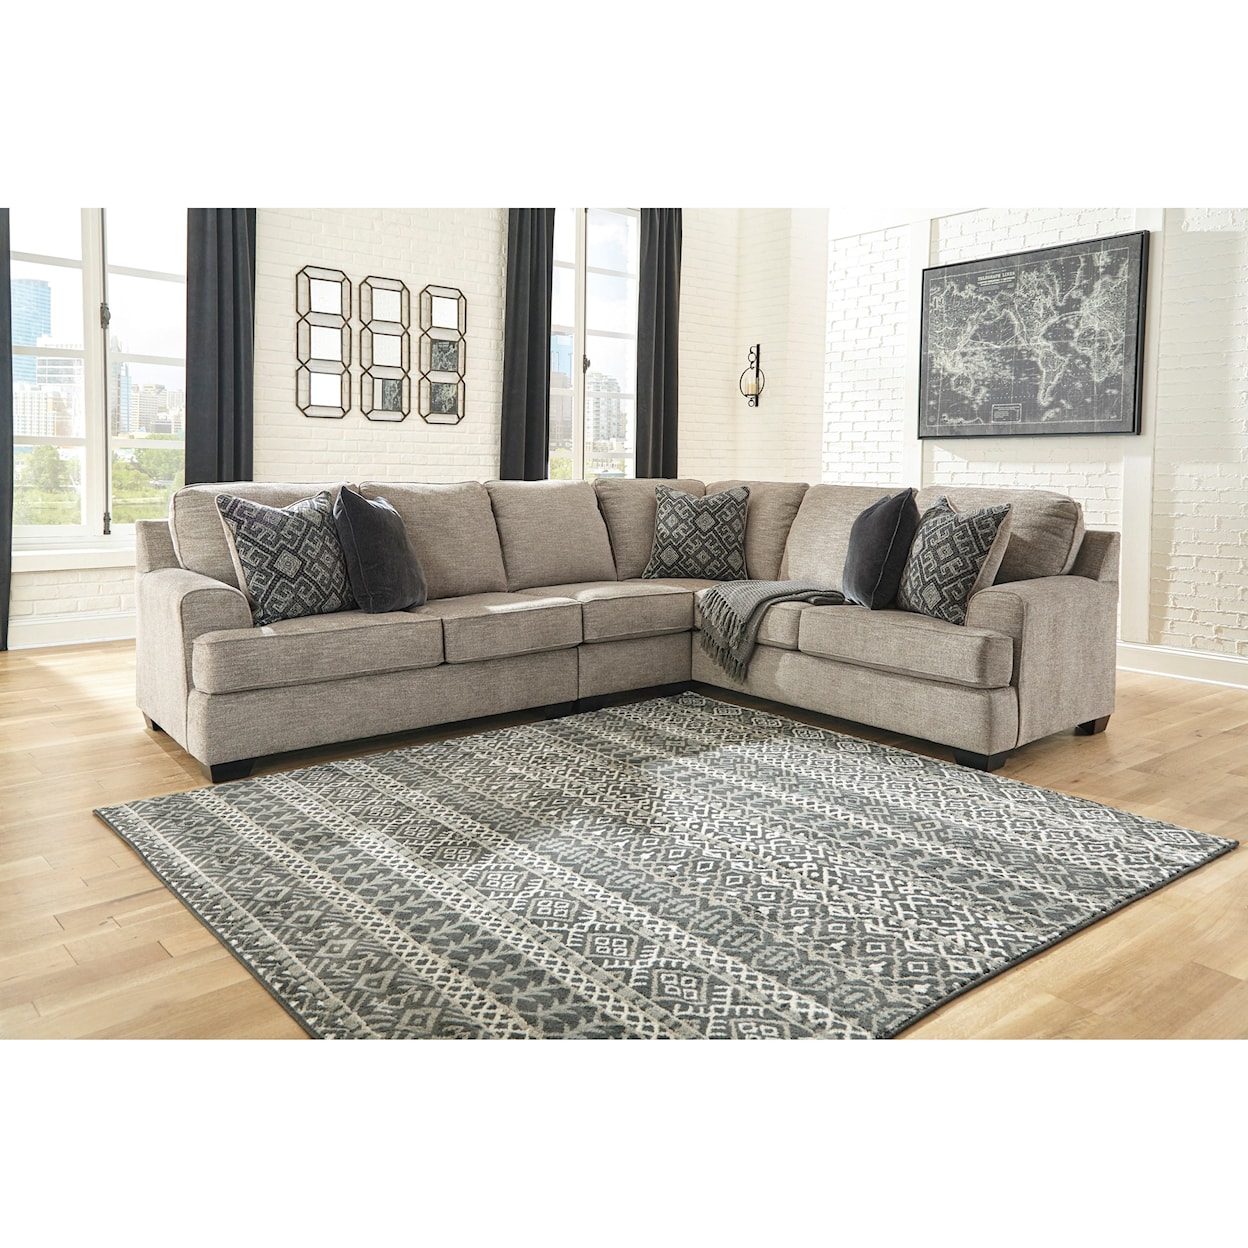 Benchcraft Bovarian 3-Piece Sectional